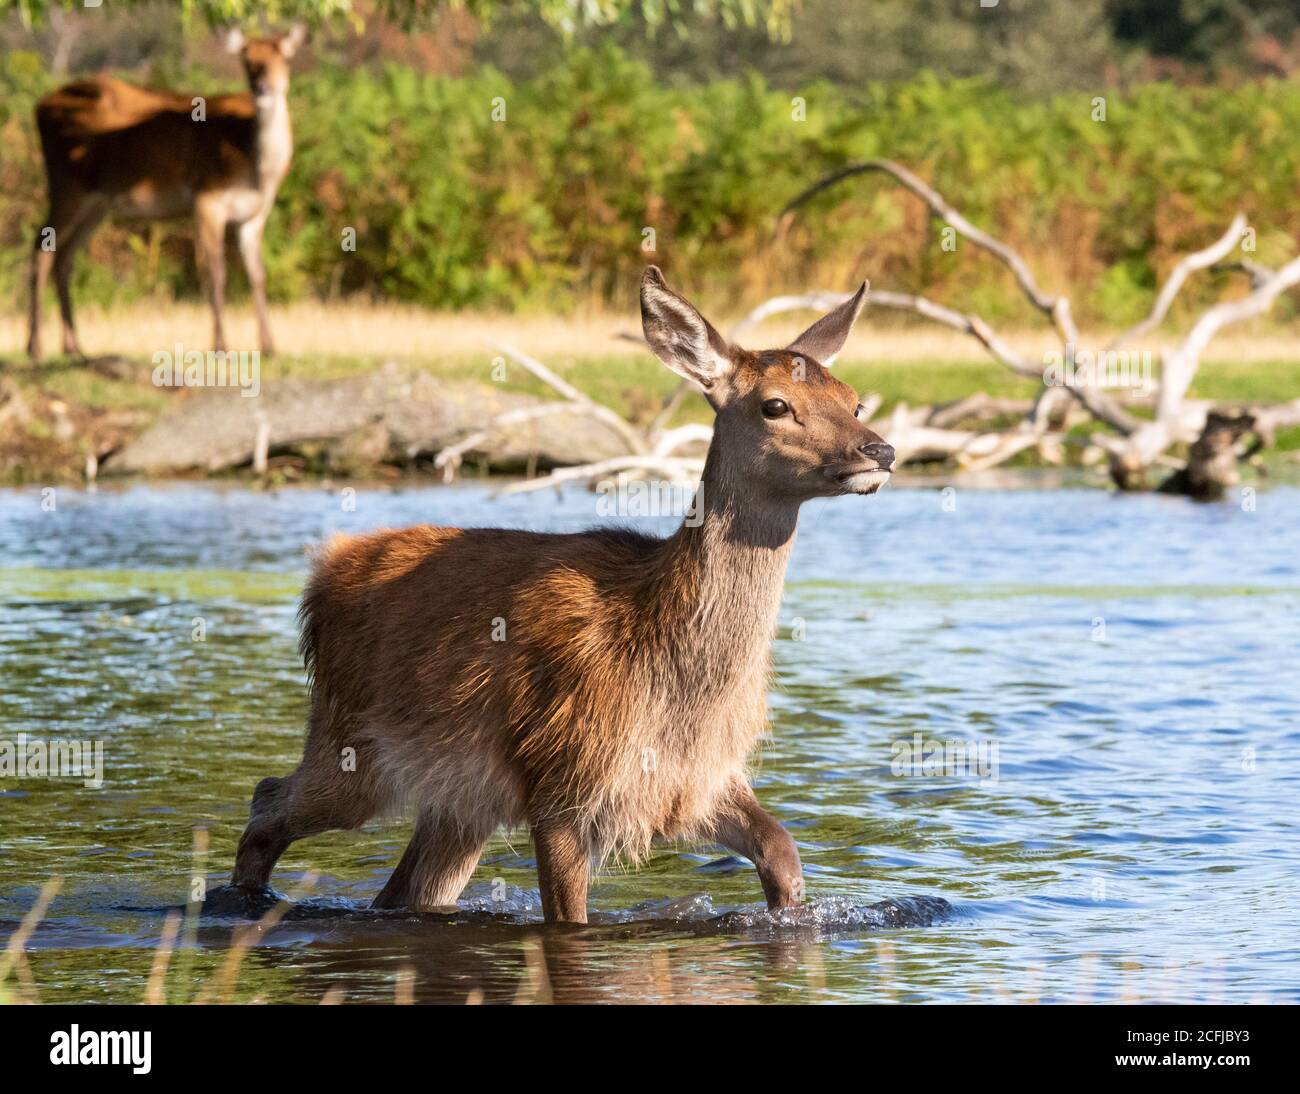 An alert young red deer wades knee-deep in the cooling waters of a lake in Bushy Park, West London, during the height of summer Stock Photo